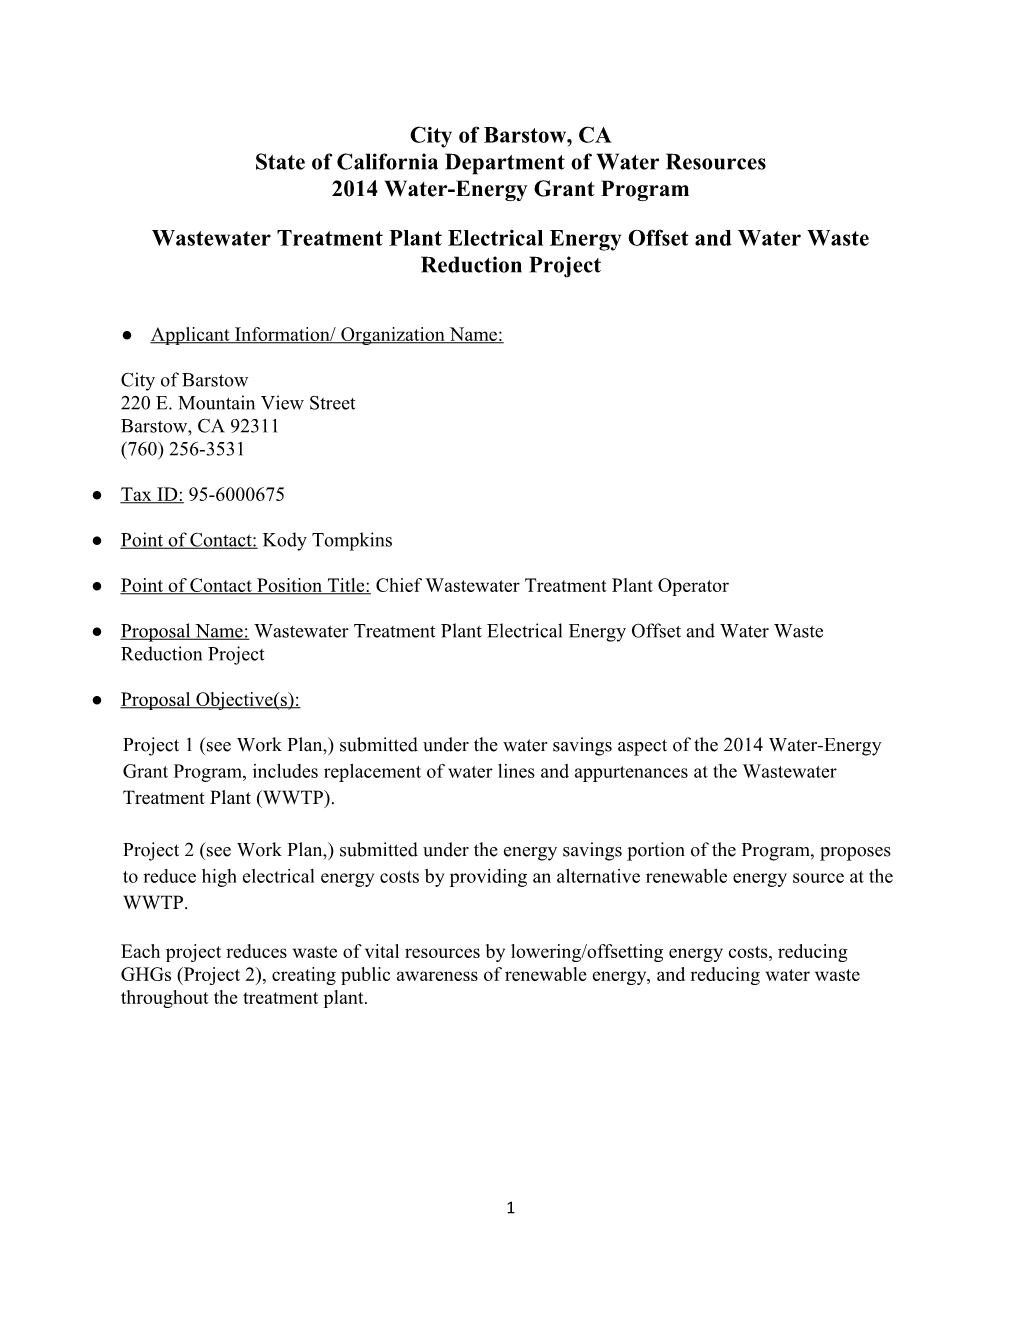 City of Barstow CA 2014 Water-Energy Grant Program Application General Information 2Nd